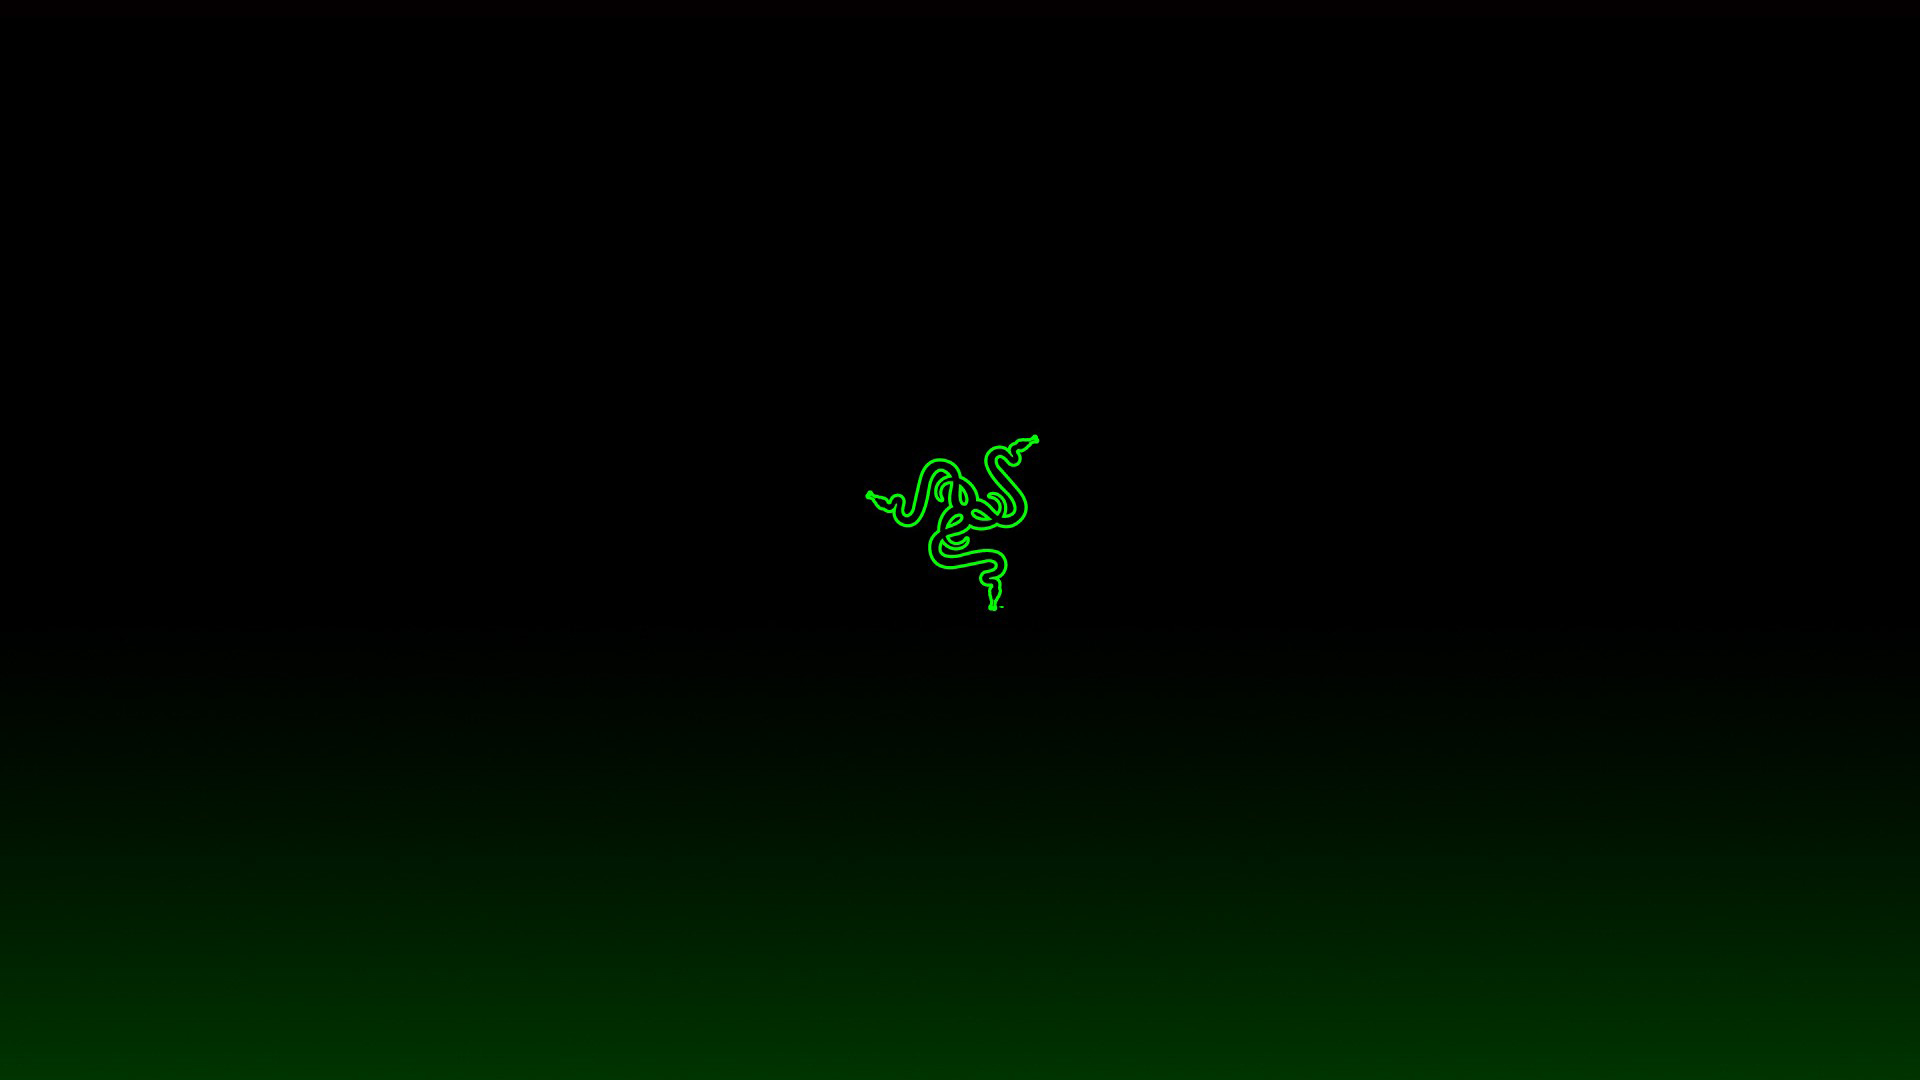 Free Download Razer Green Logo Hd Wallpaper 19x1080 1080p Compatible For 1280x7 19x1080 For Your Desktop Mobile Tablet Explore 50 Razer Pc Wallpaper Razer 19x1080 Wallpaper